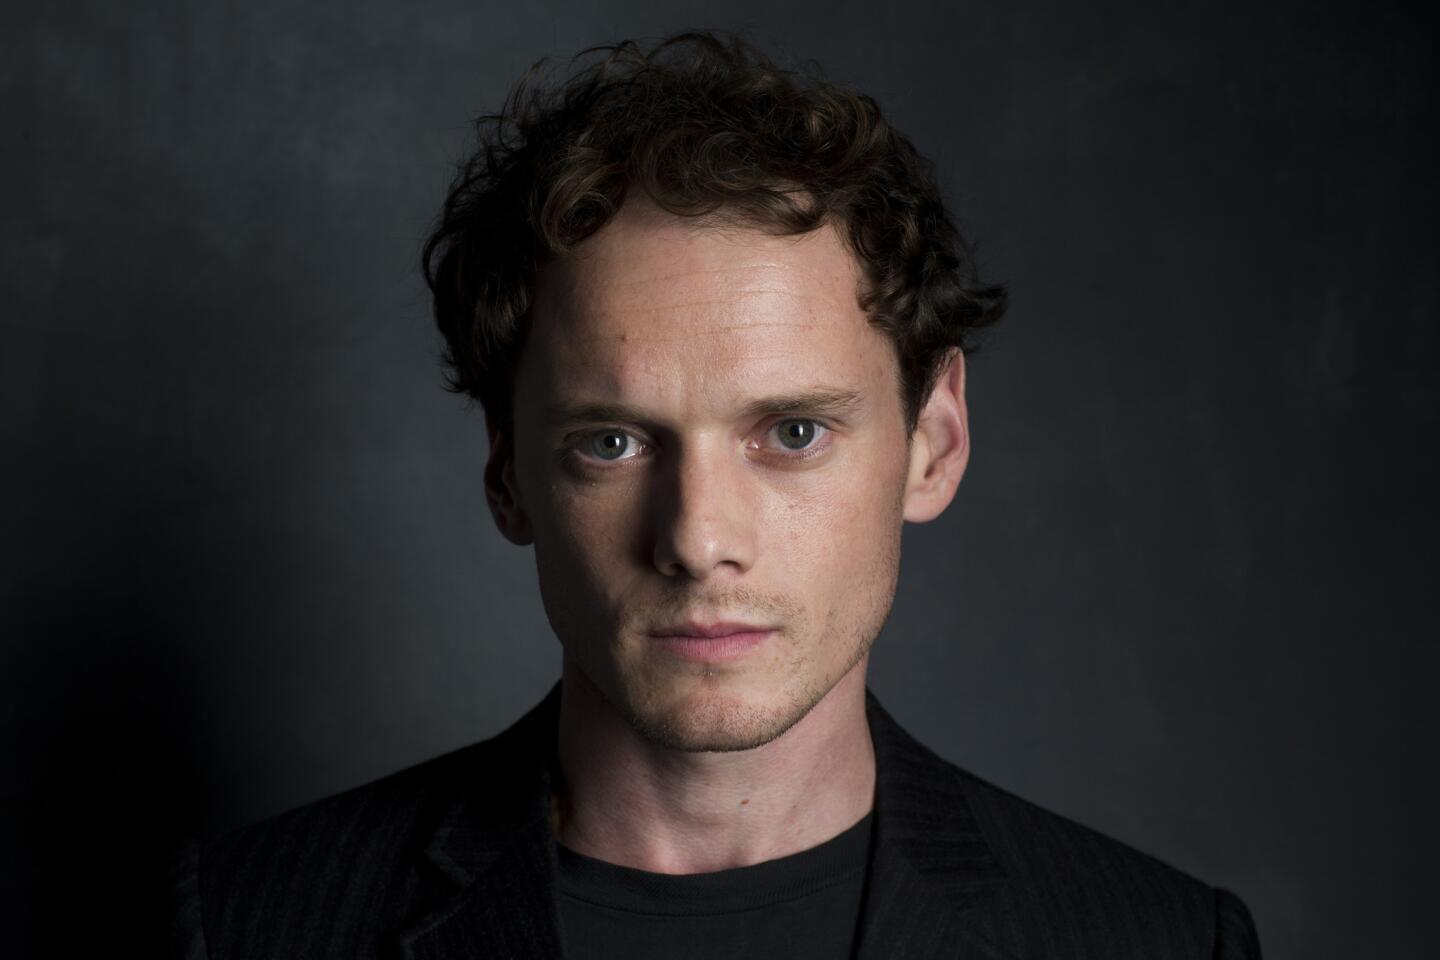 Anton Yelchin, a charismatic and rising actor best known for playing Chekov in the new "Star Trek" films, has died at the age of 27. He was killed in a fatal traffic crash on Sunday, June 19.